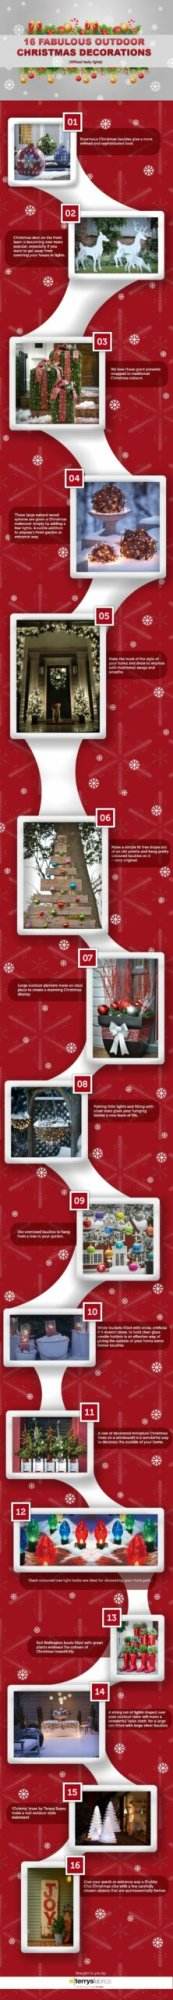 16 Fantastic Outdoor Christmas Decorations (Infographic)